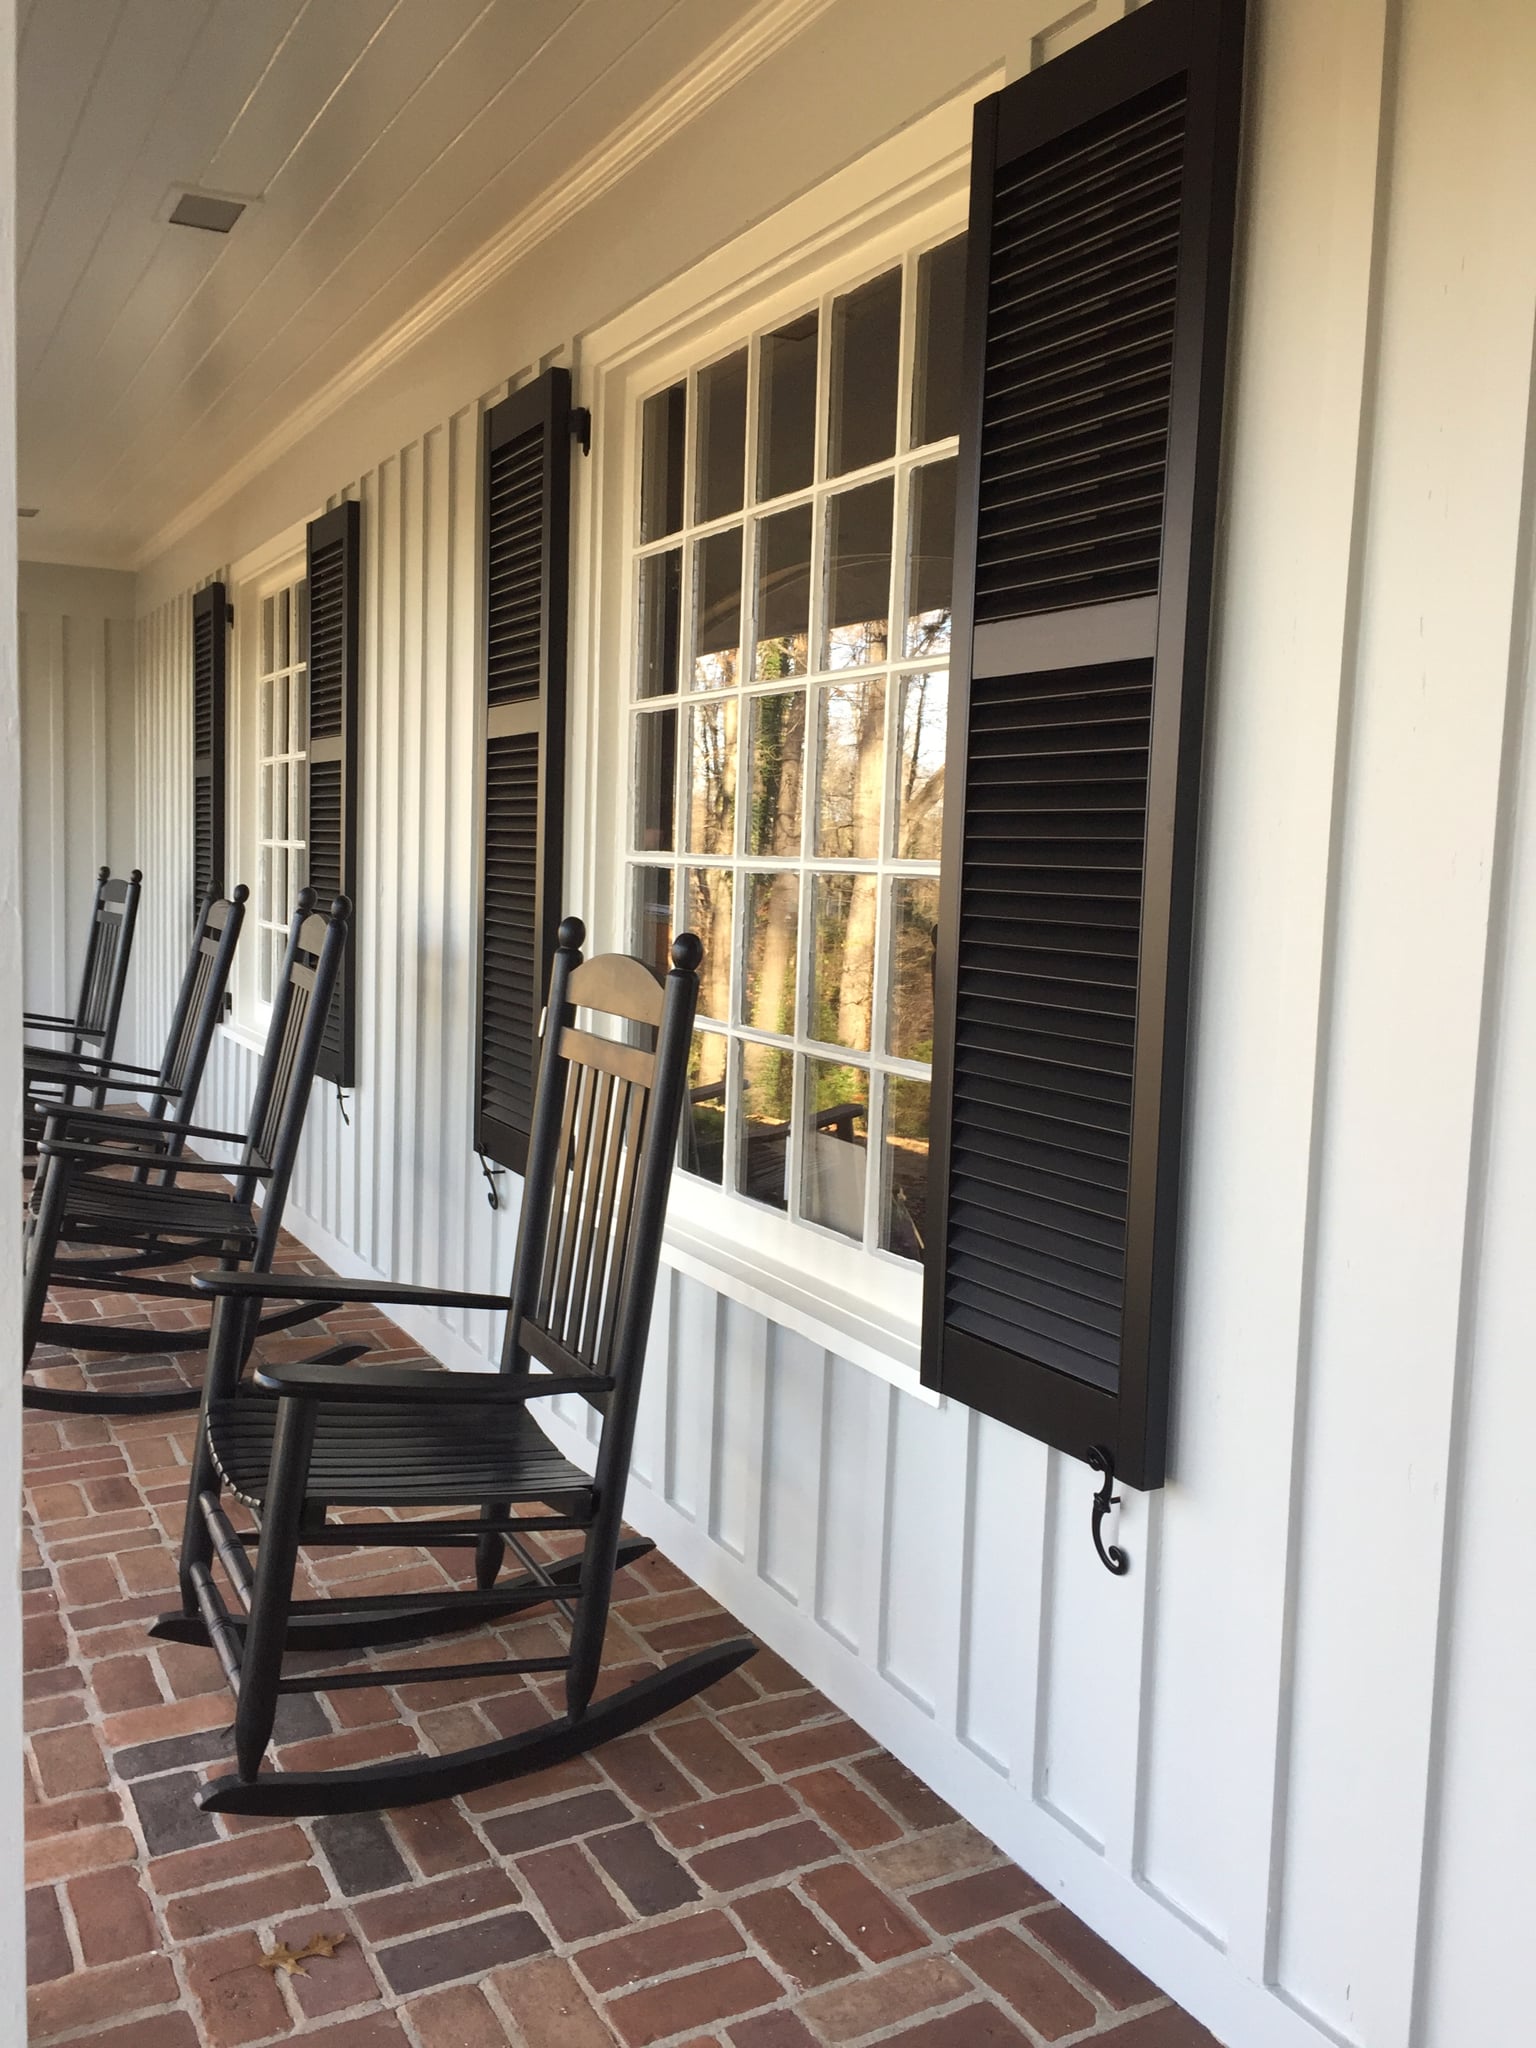 Exterior Fixed Louver Shutters on a Porch, project in Gastonia, NC